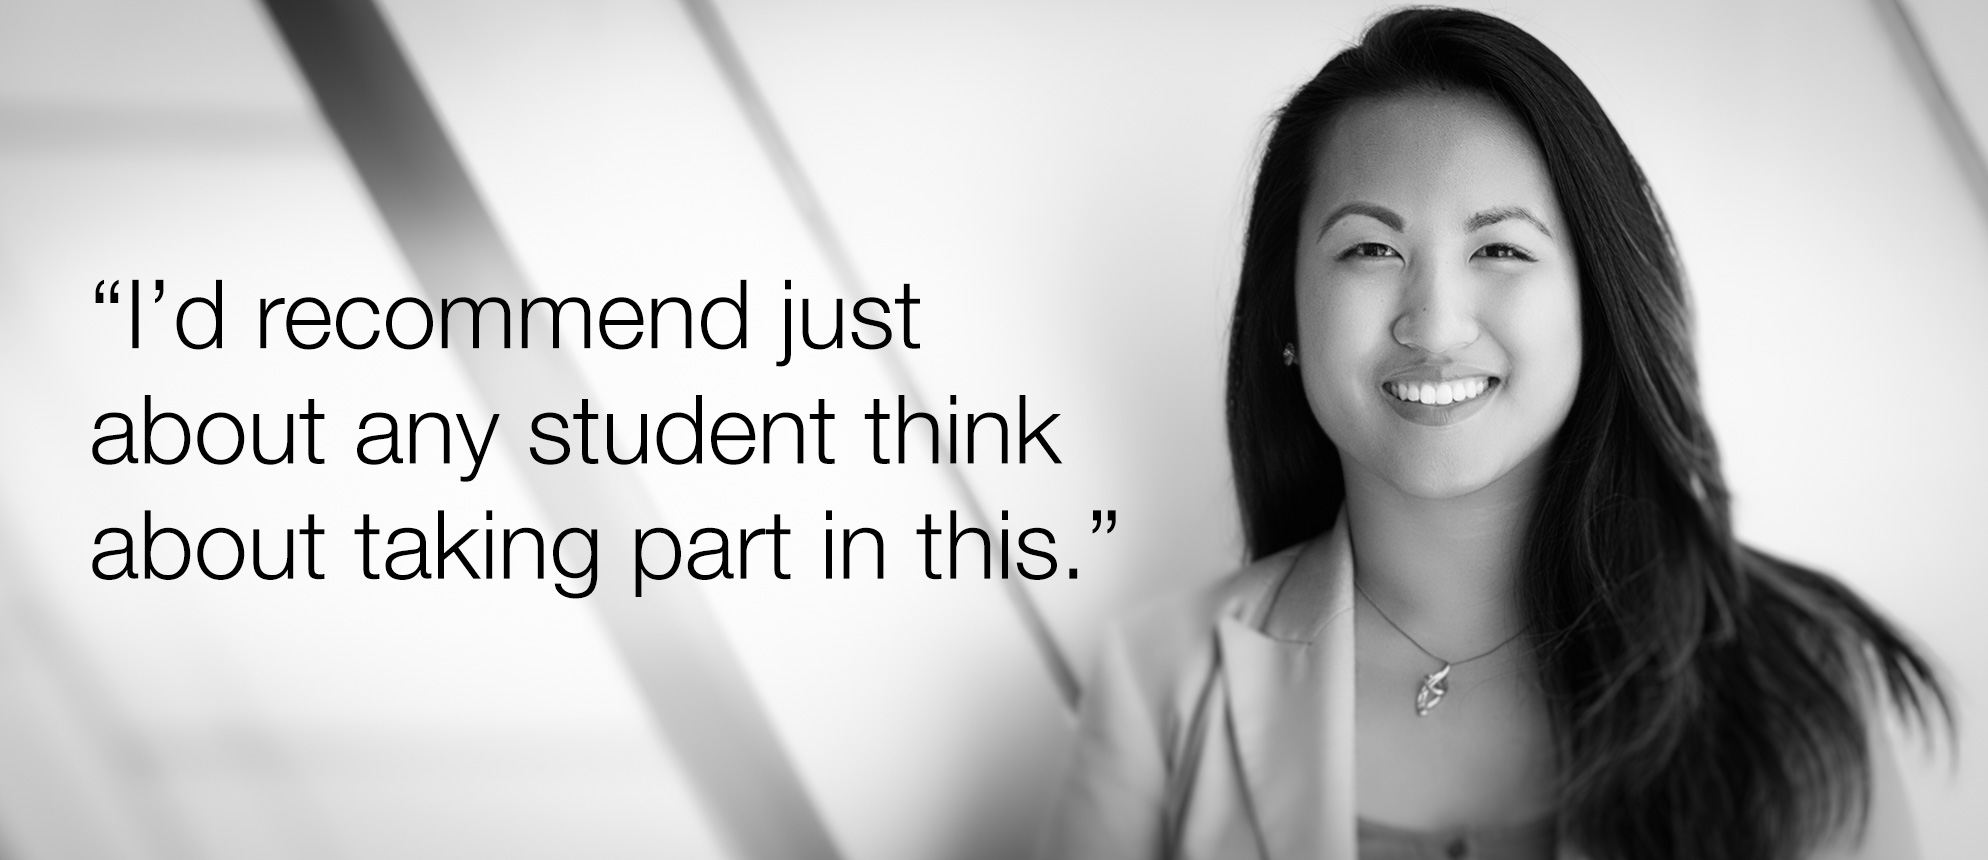 Justine Yang: I'd recommend every student think about taking part in this."